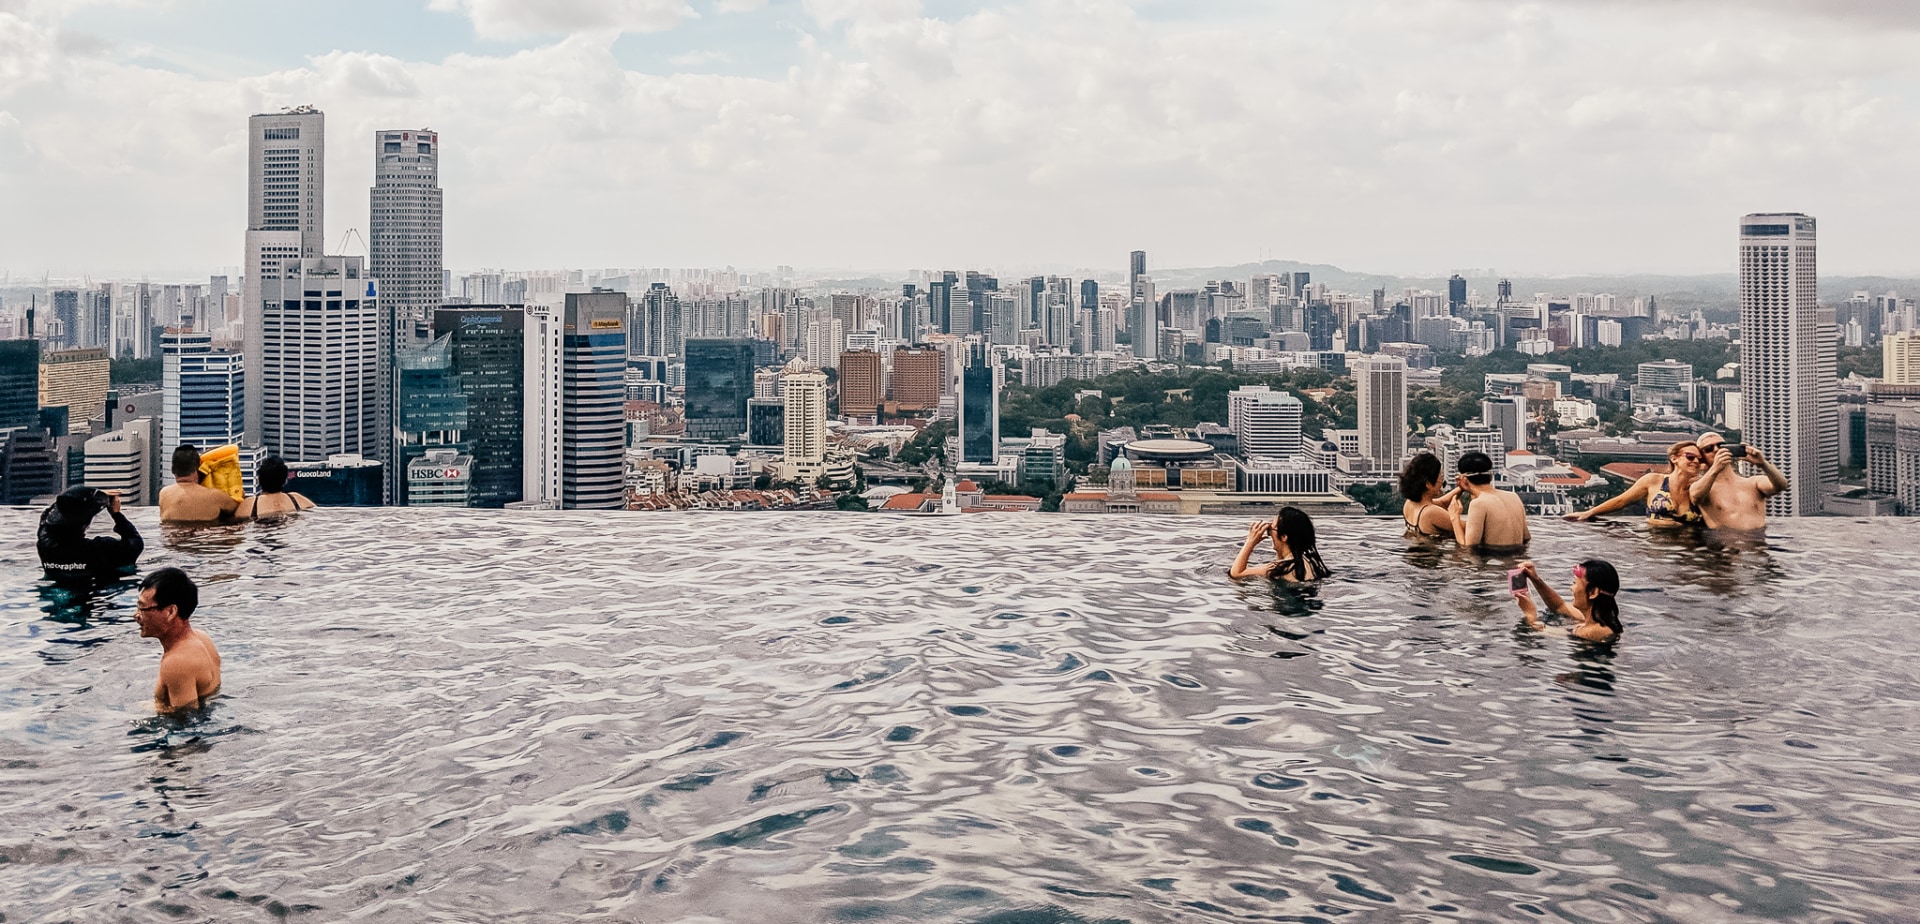 Marina Bay Sands Infinity Pool Singapore: Is It Worth The Hype?